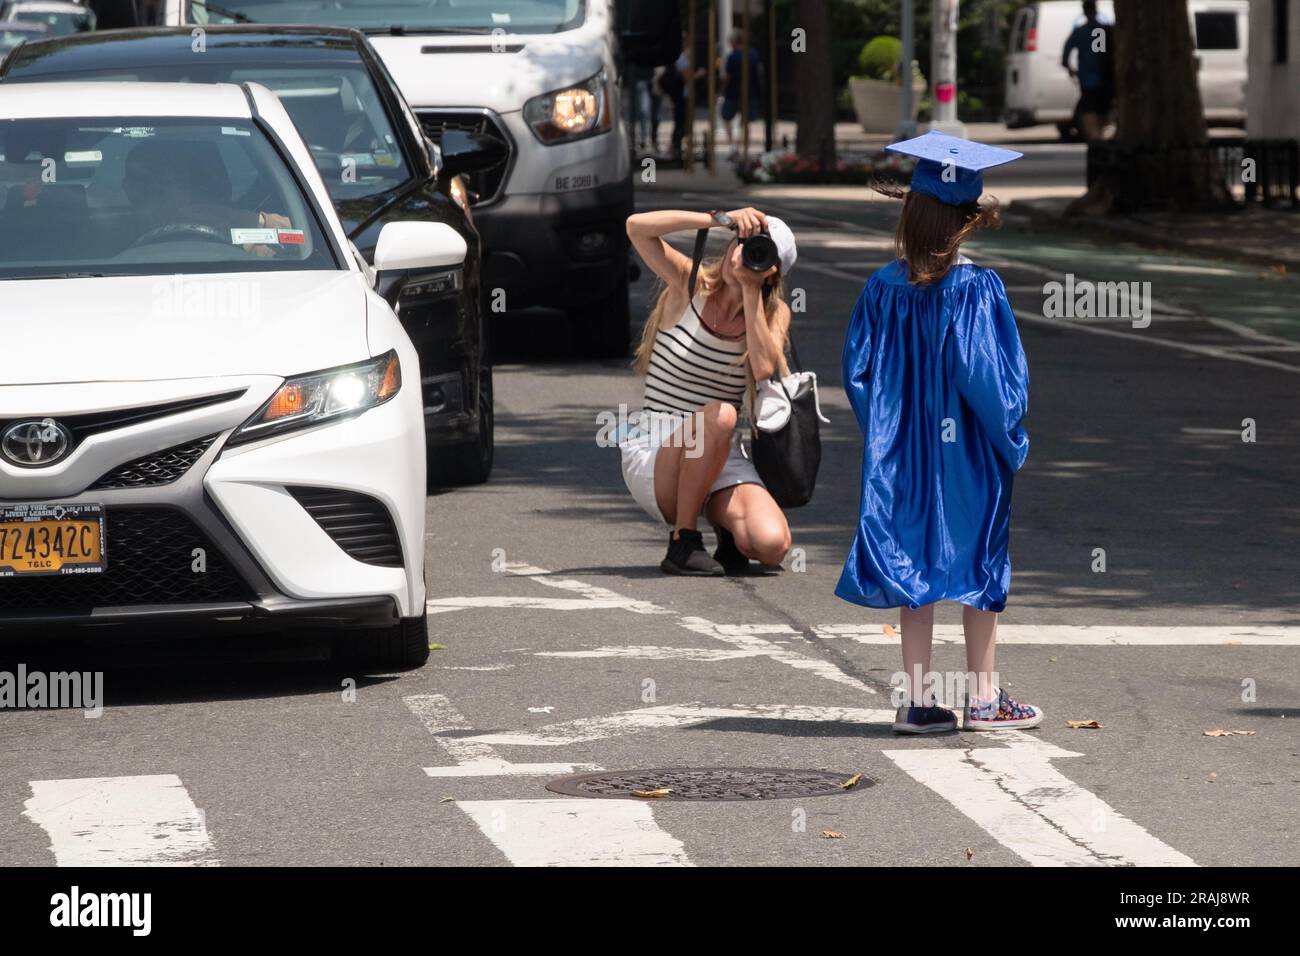 A young girl in a blue cap and gown is photographed on Fifth Avenue in New York City, June 2023. It may be mother & daughter. Stock Photo